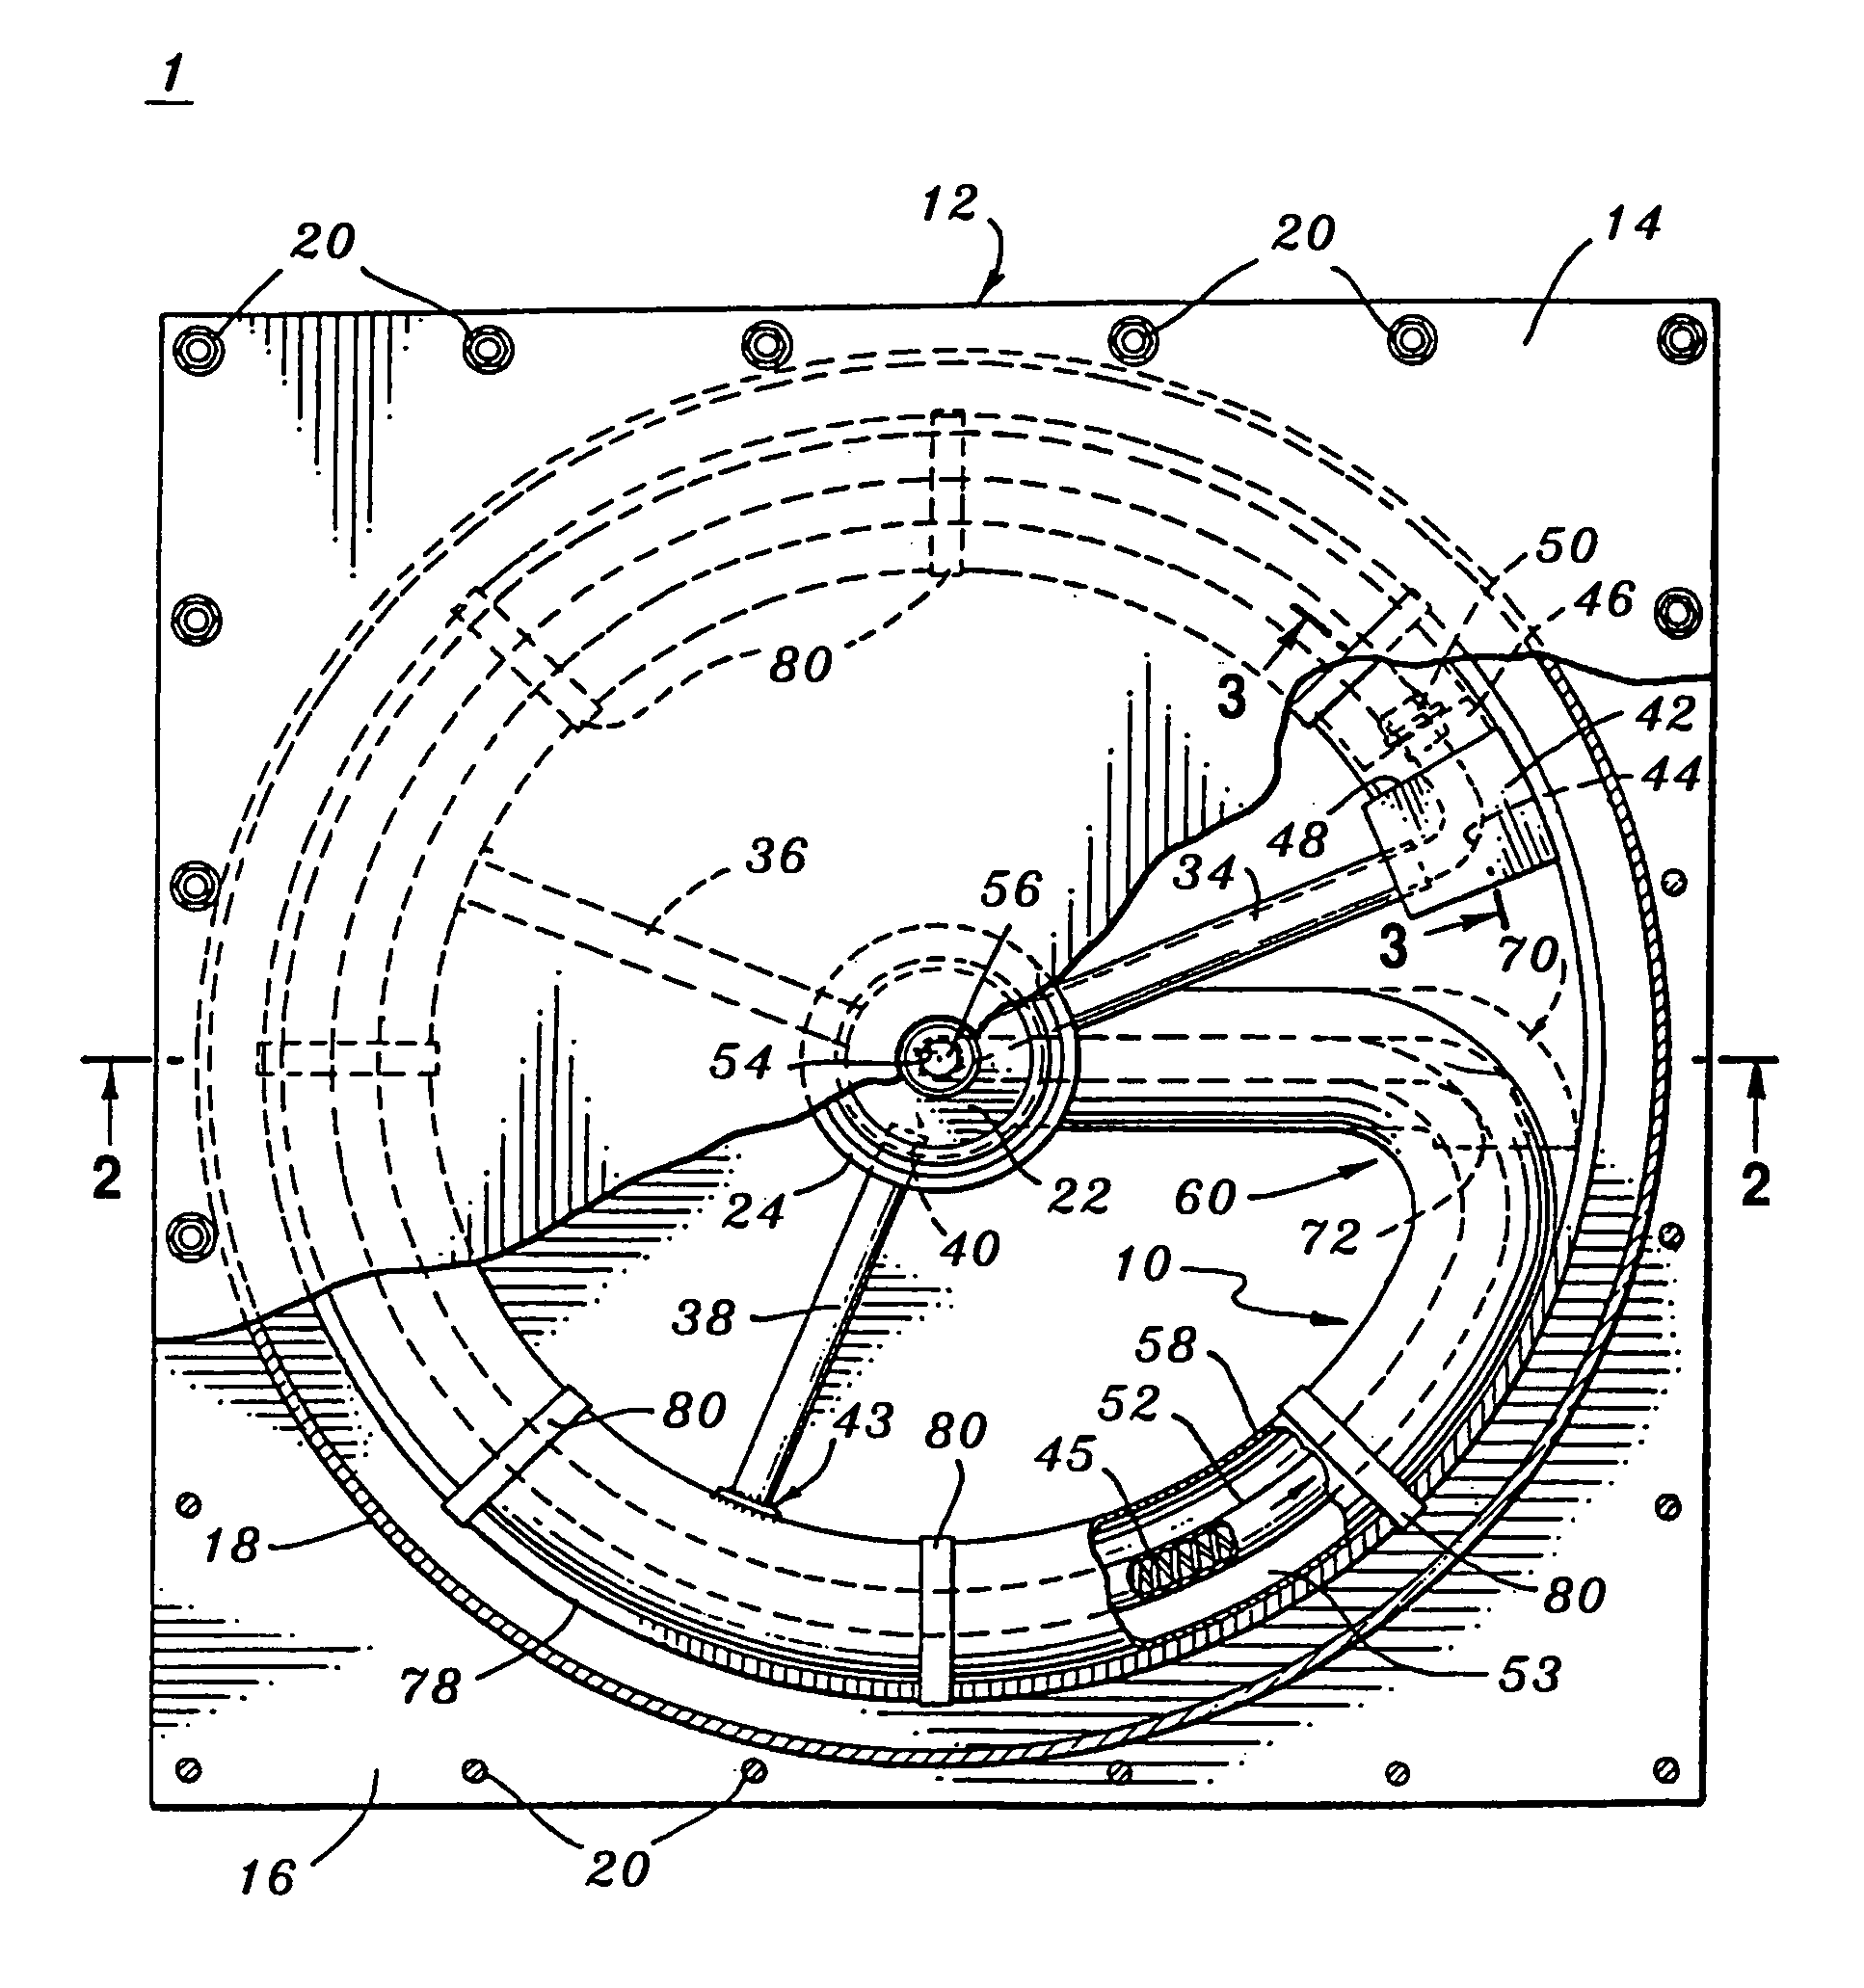 Gas-jet driven rotary device for generating a field and a process for treating items within the field for increased performance